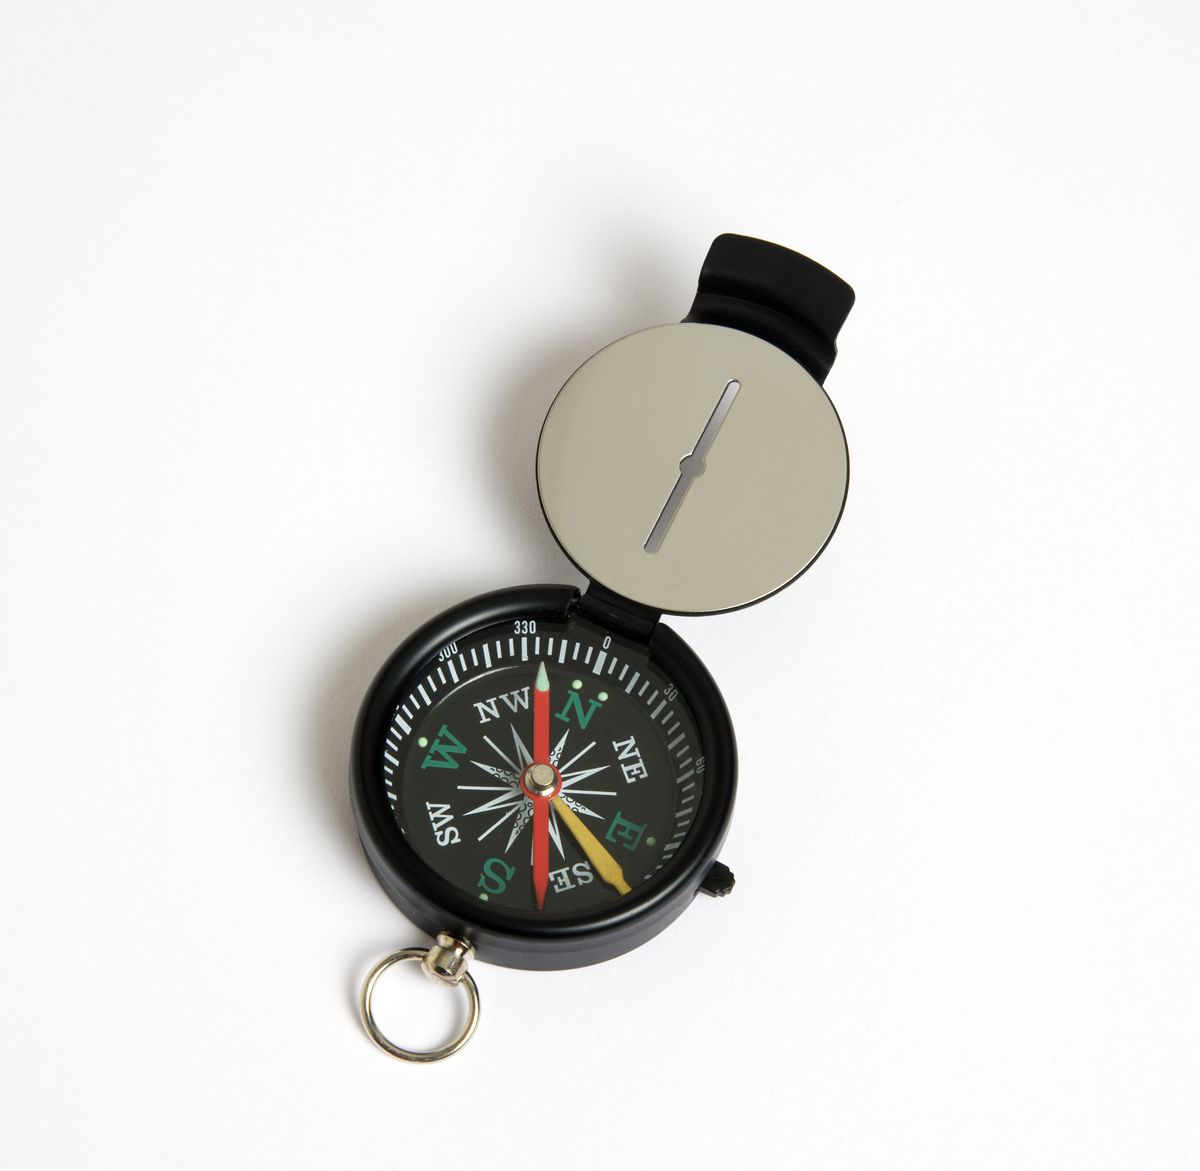 Sighting compass with dial pointing to magnetic north